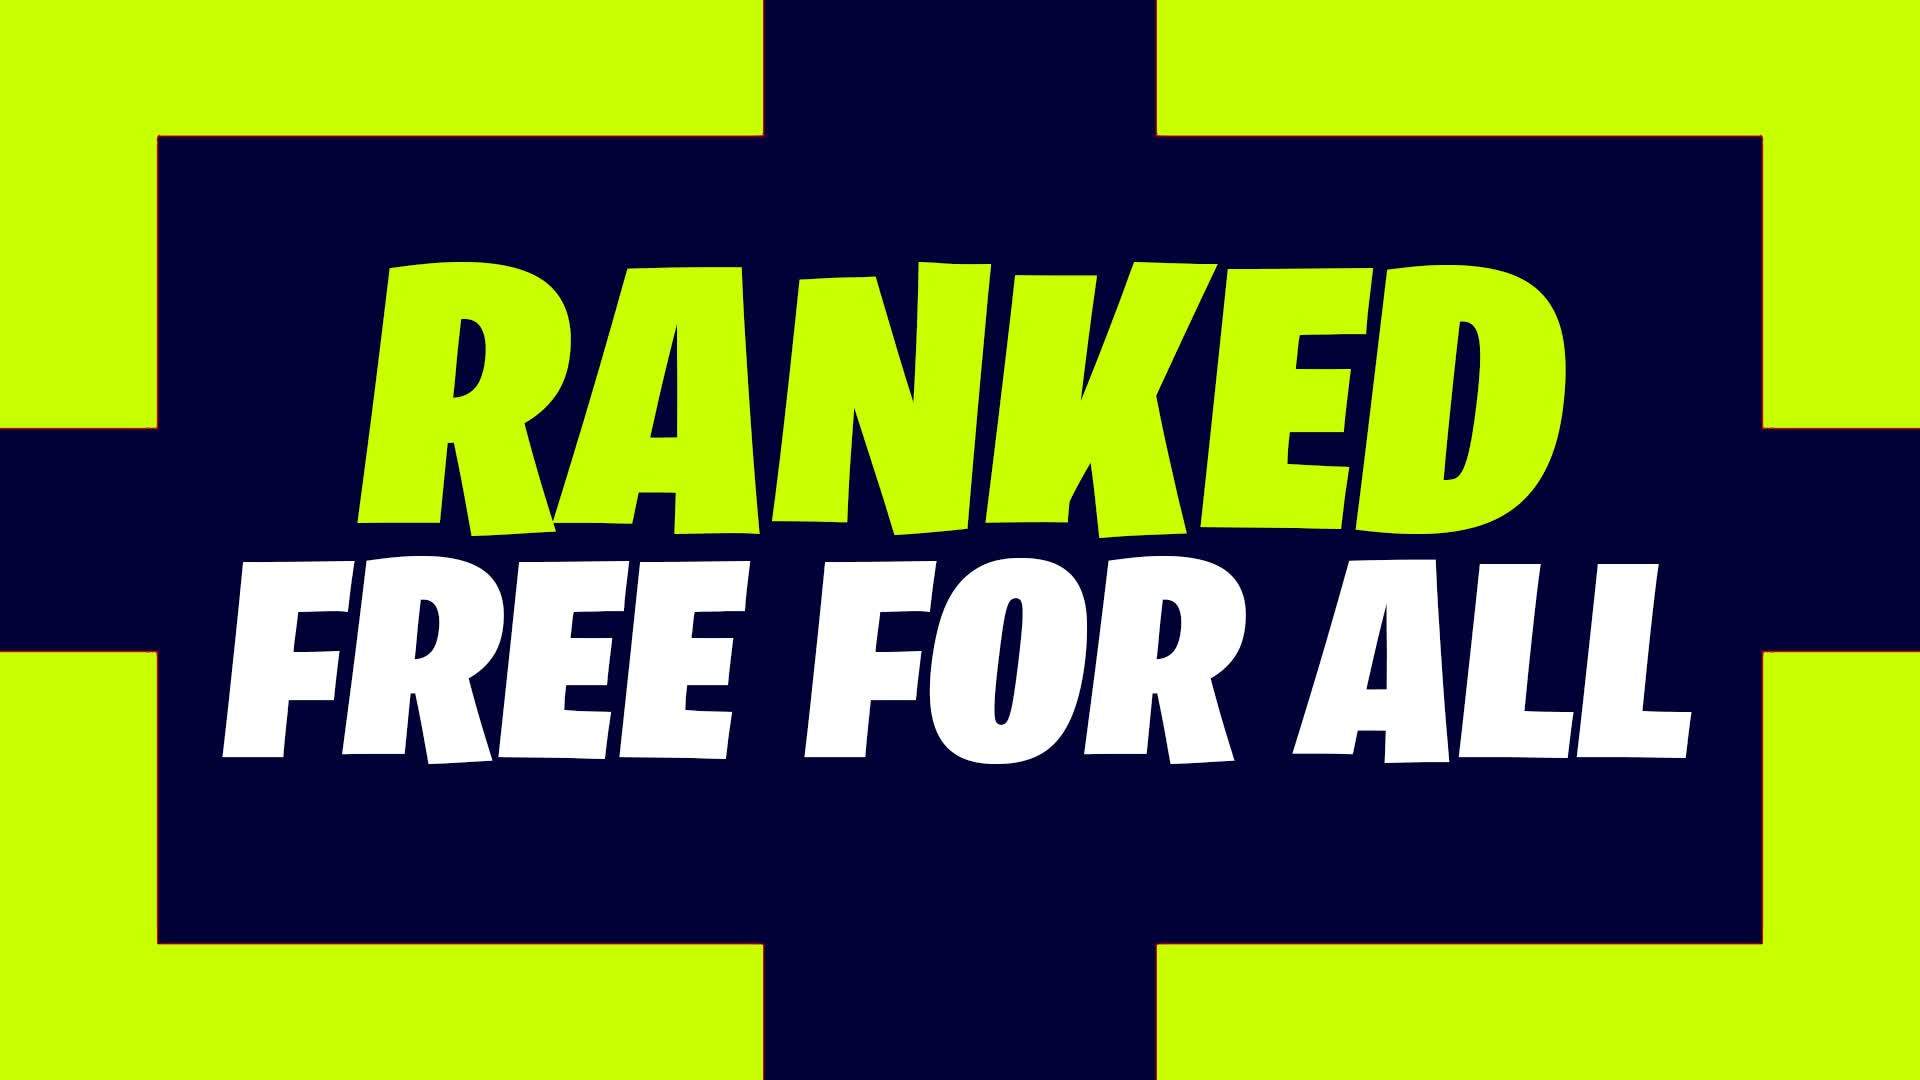 RANKED FREE FOR ALL